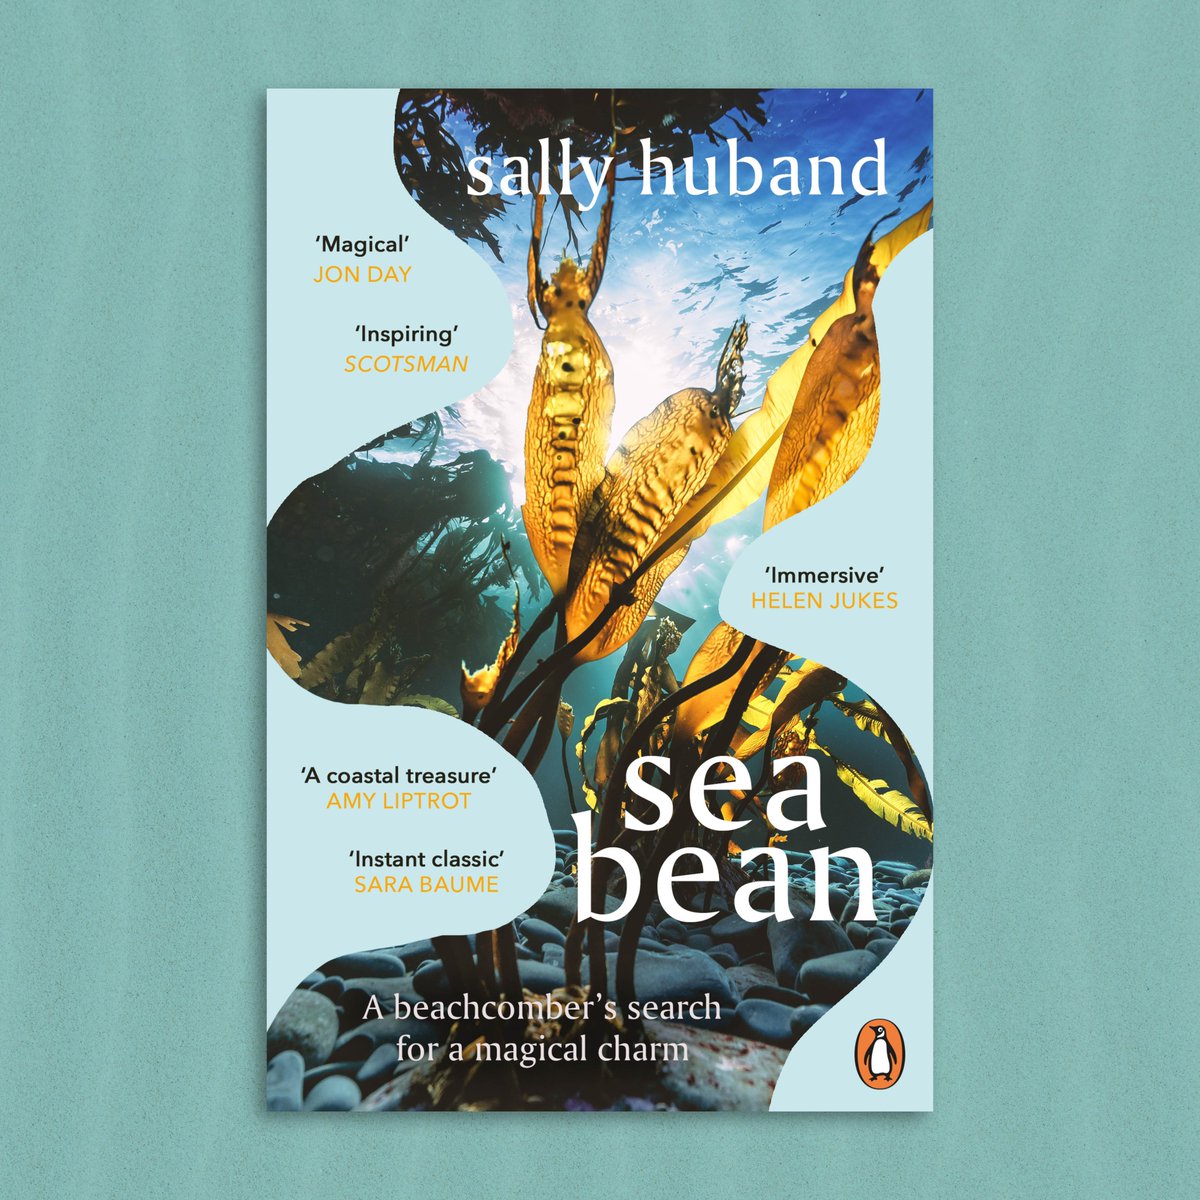 Out today! Sally Huband's memoir on a powerful journey of sea and self, trial and hope on the islands of Shetland, SEA BEAN is out in paperback today. 🐚 'Inspiring' SCOTSMAN 🌊'A coastal treasure' AMY LIPTROT 🫘 'Magical' JON DAY 🐚'Immersive' HELEN JUKES #SeaBean 🌊